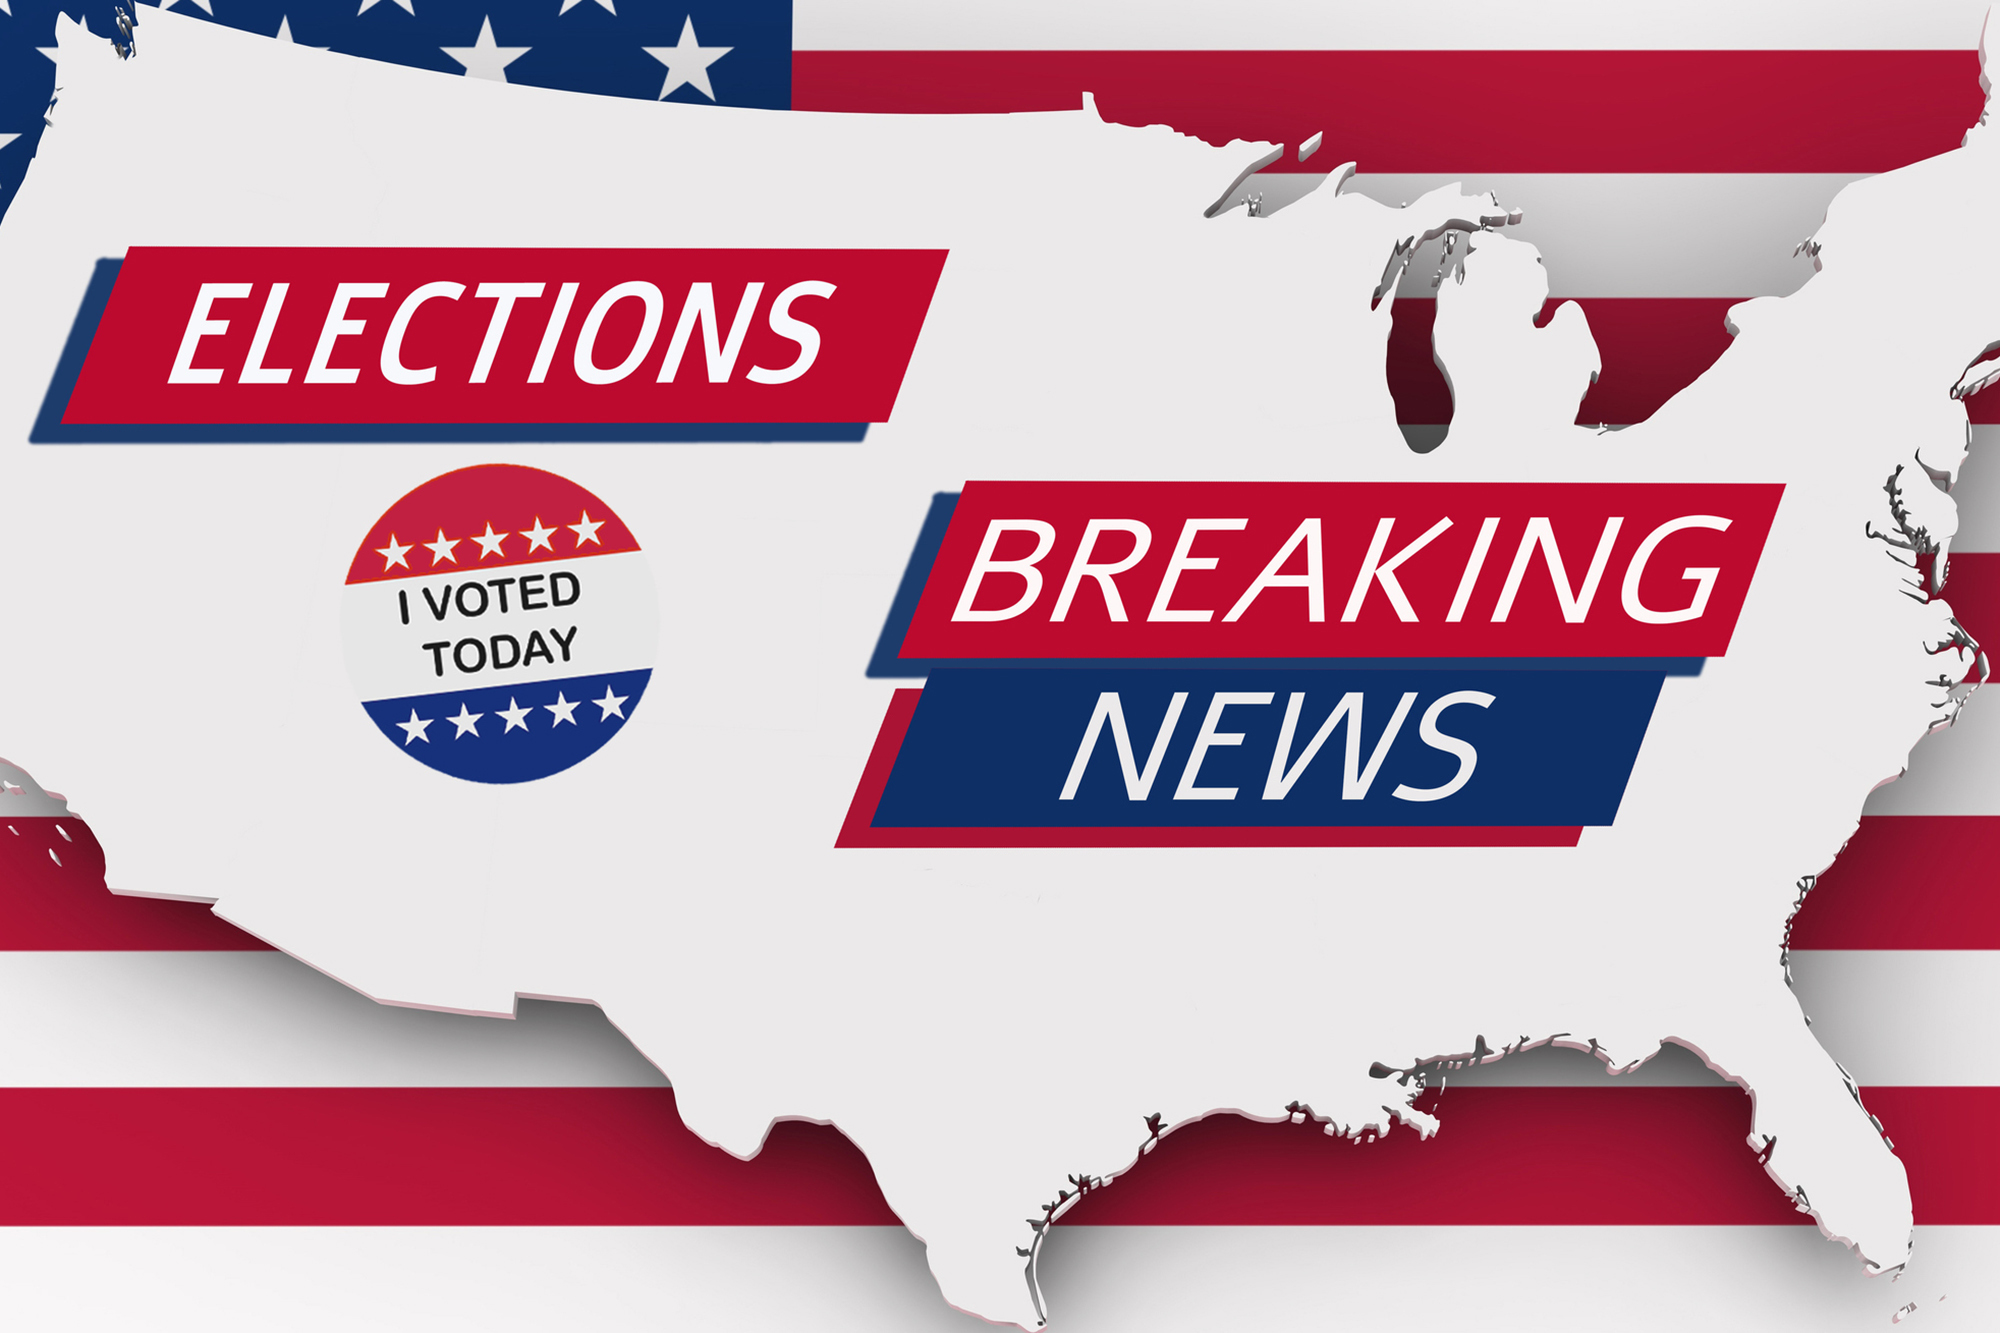 Map of United States that reads 'Elections,' 'I voted today,' and 'Breaking news'